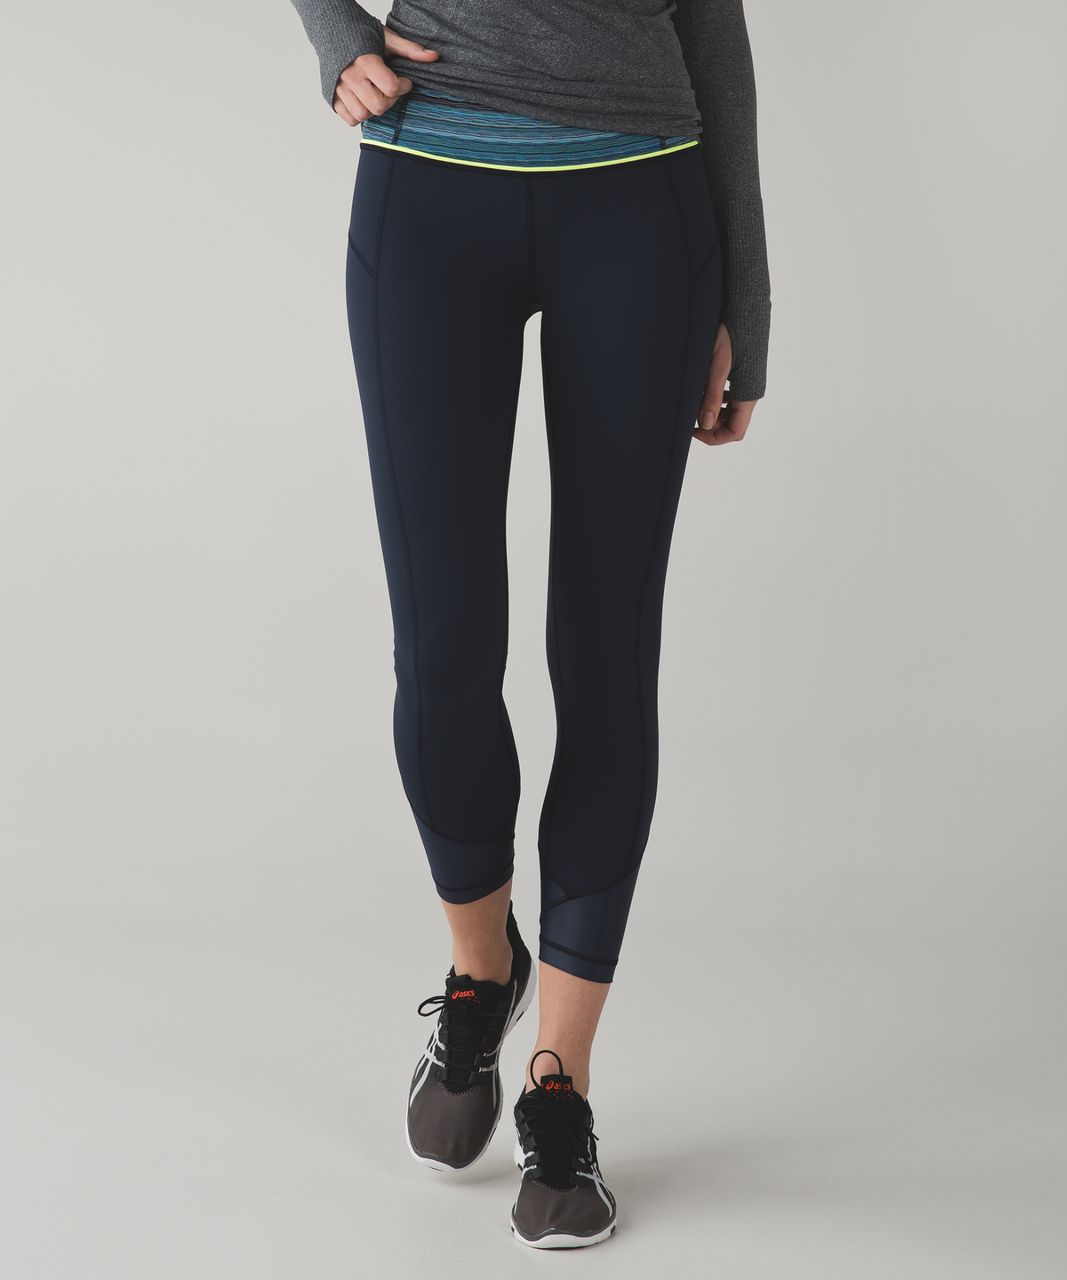 Lululemon Pace Queen Tight *Full-On Luxtreme - Inkwell / Space Dye Twist Naval Blue Peacock Blue